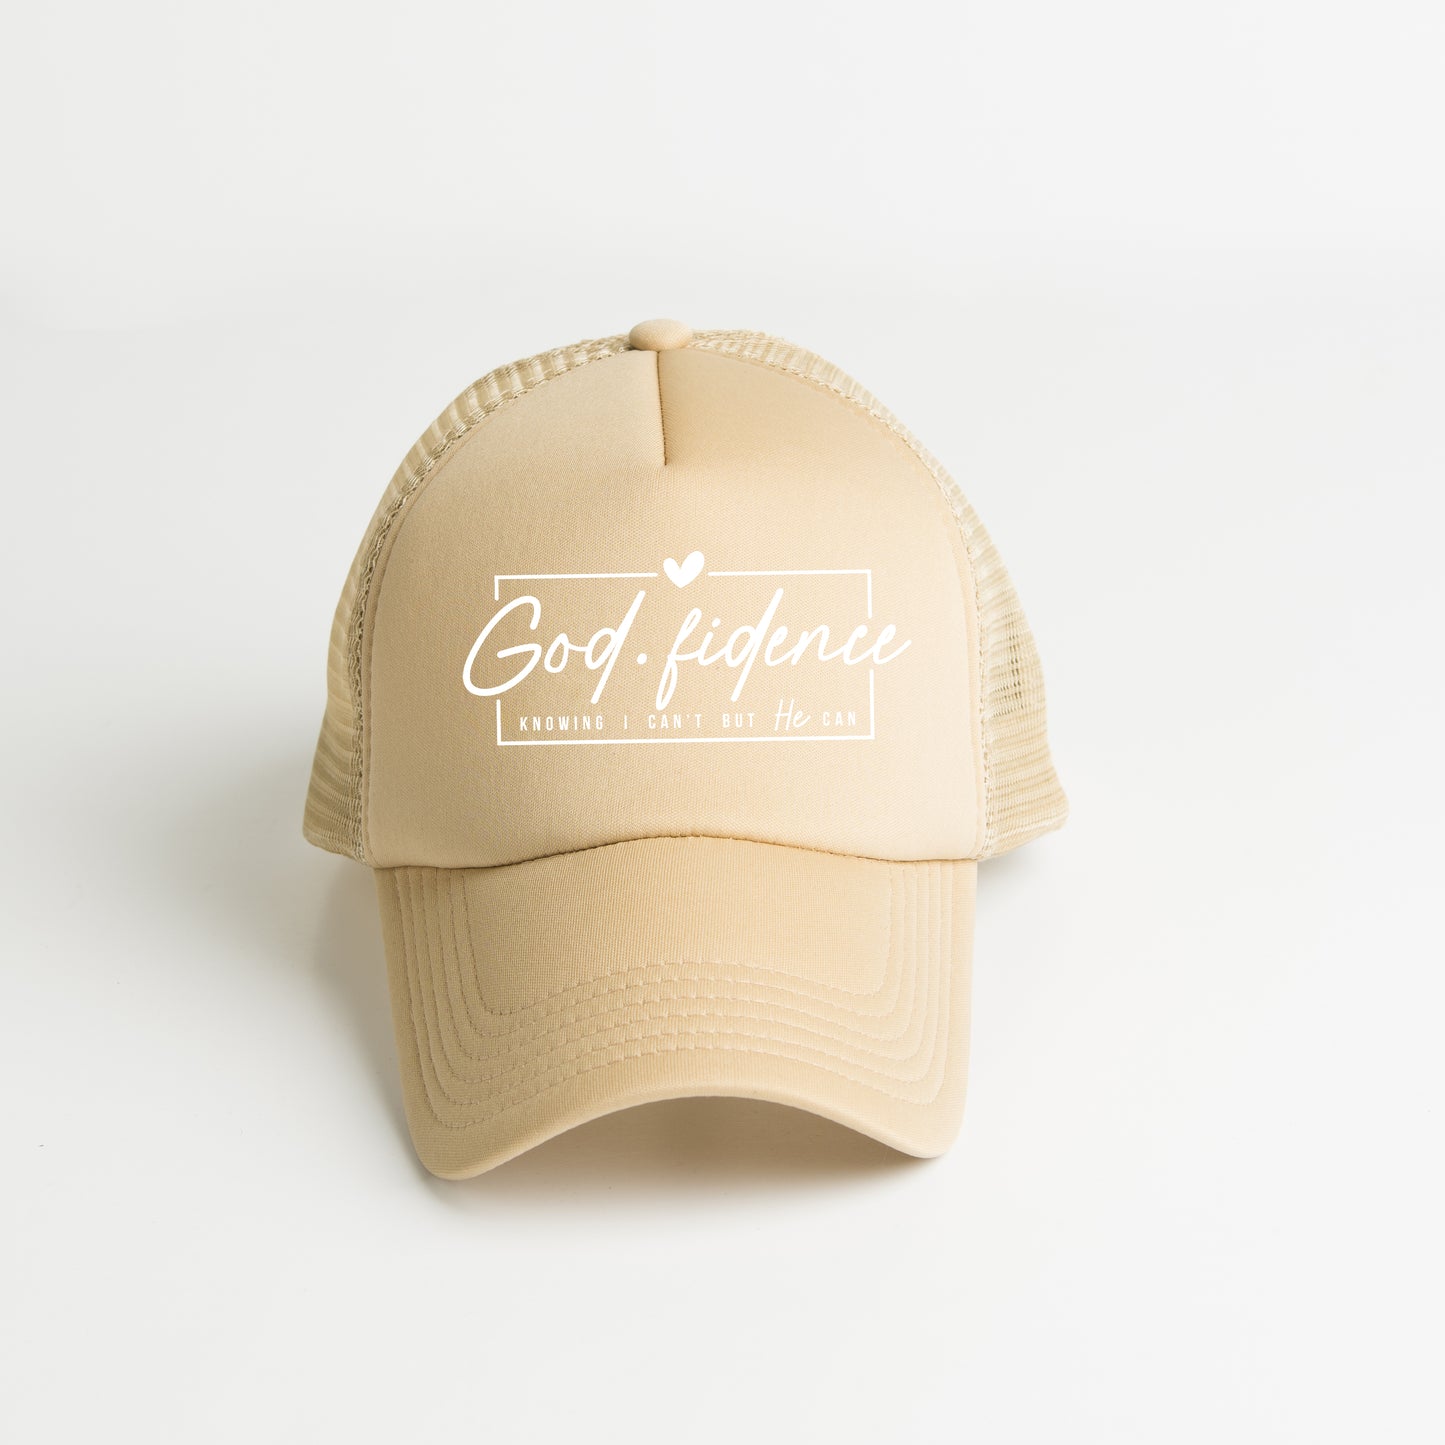 Godfidence Knowing I Can't But He Can | Foam Trucker Hat